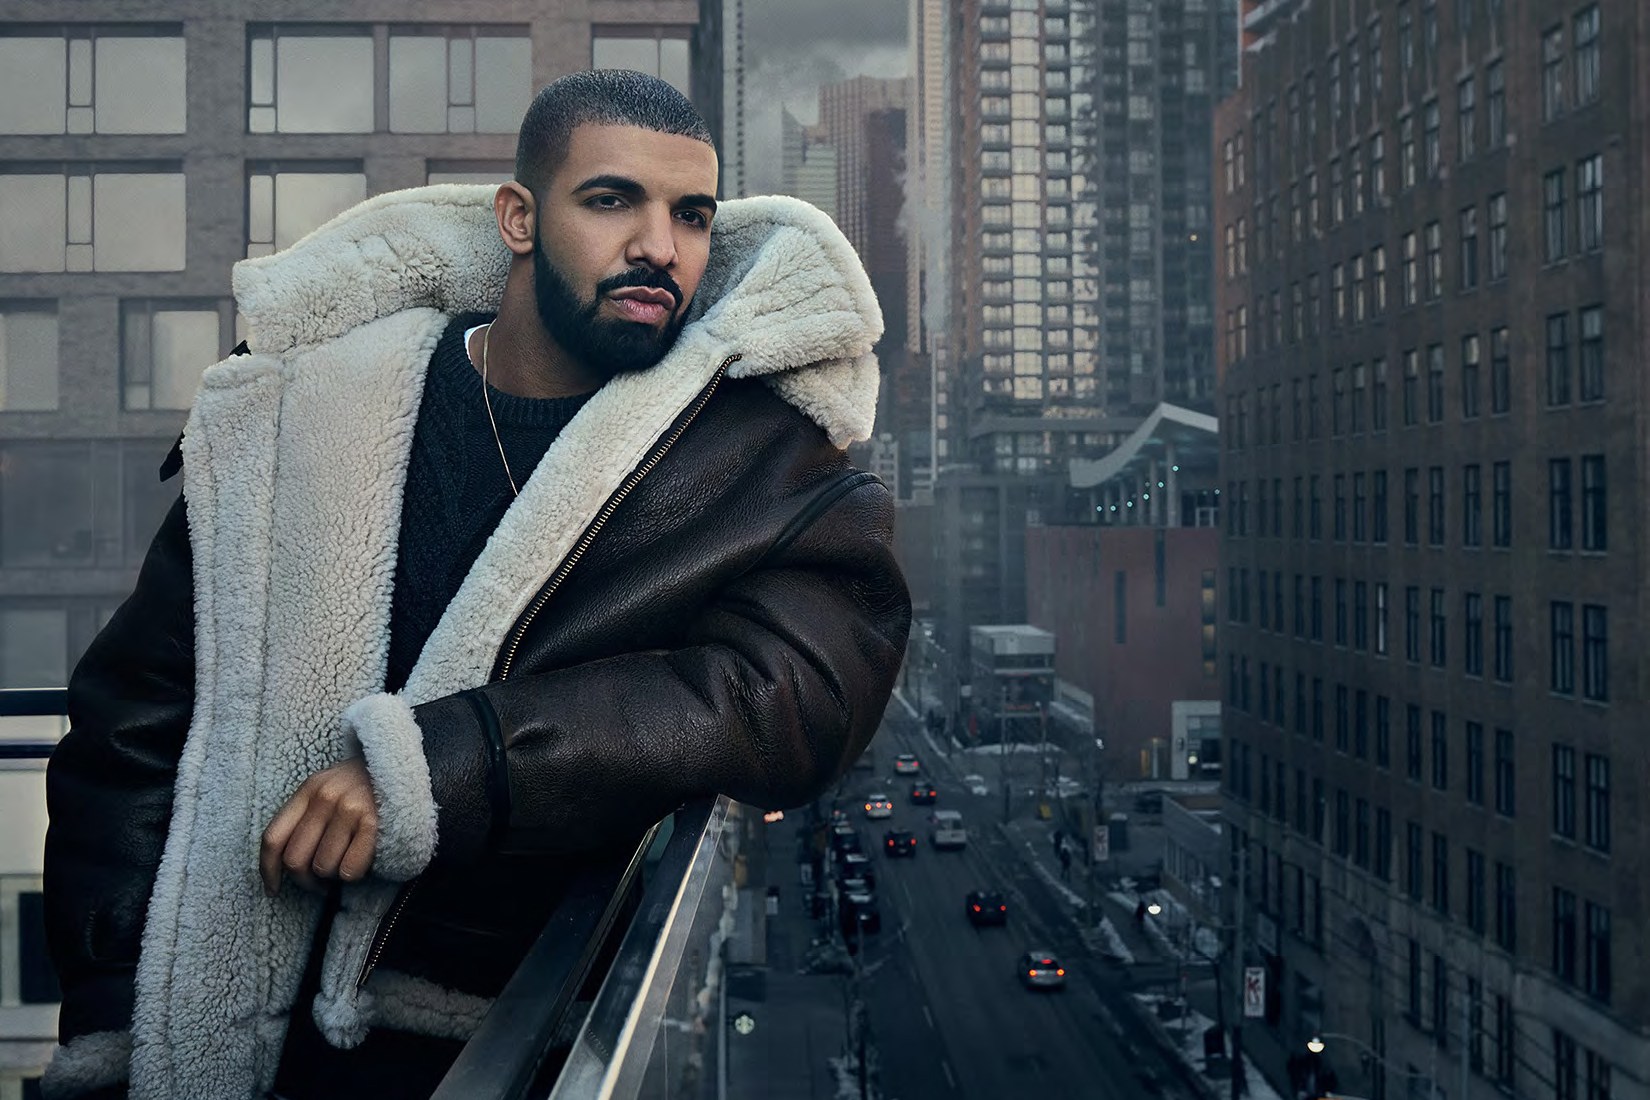 Drake sells over 600K copies of Views in one night